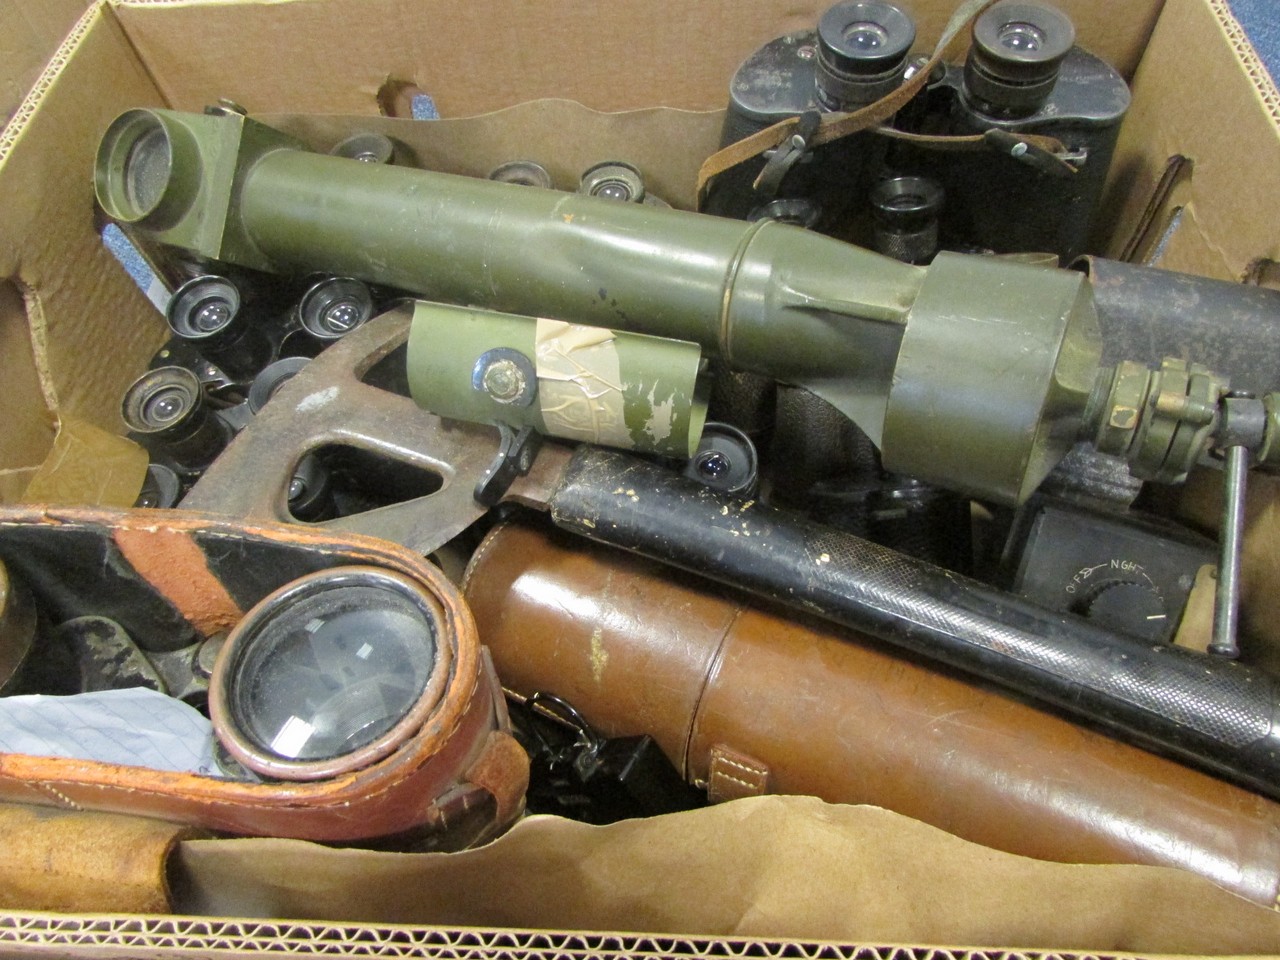 Large collection of various old Military Binoculars and various Scopes, fire axe, etc, noted pair of